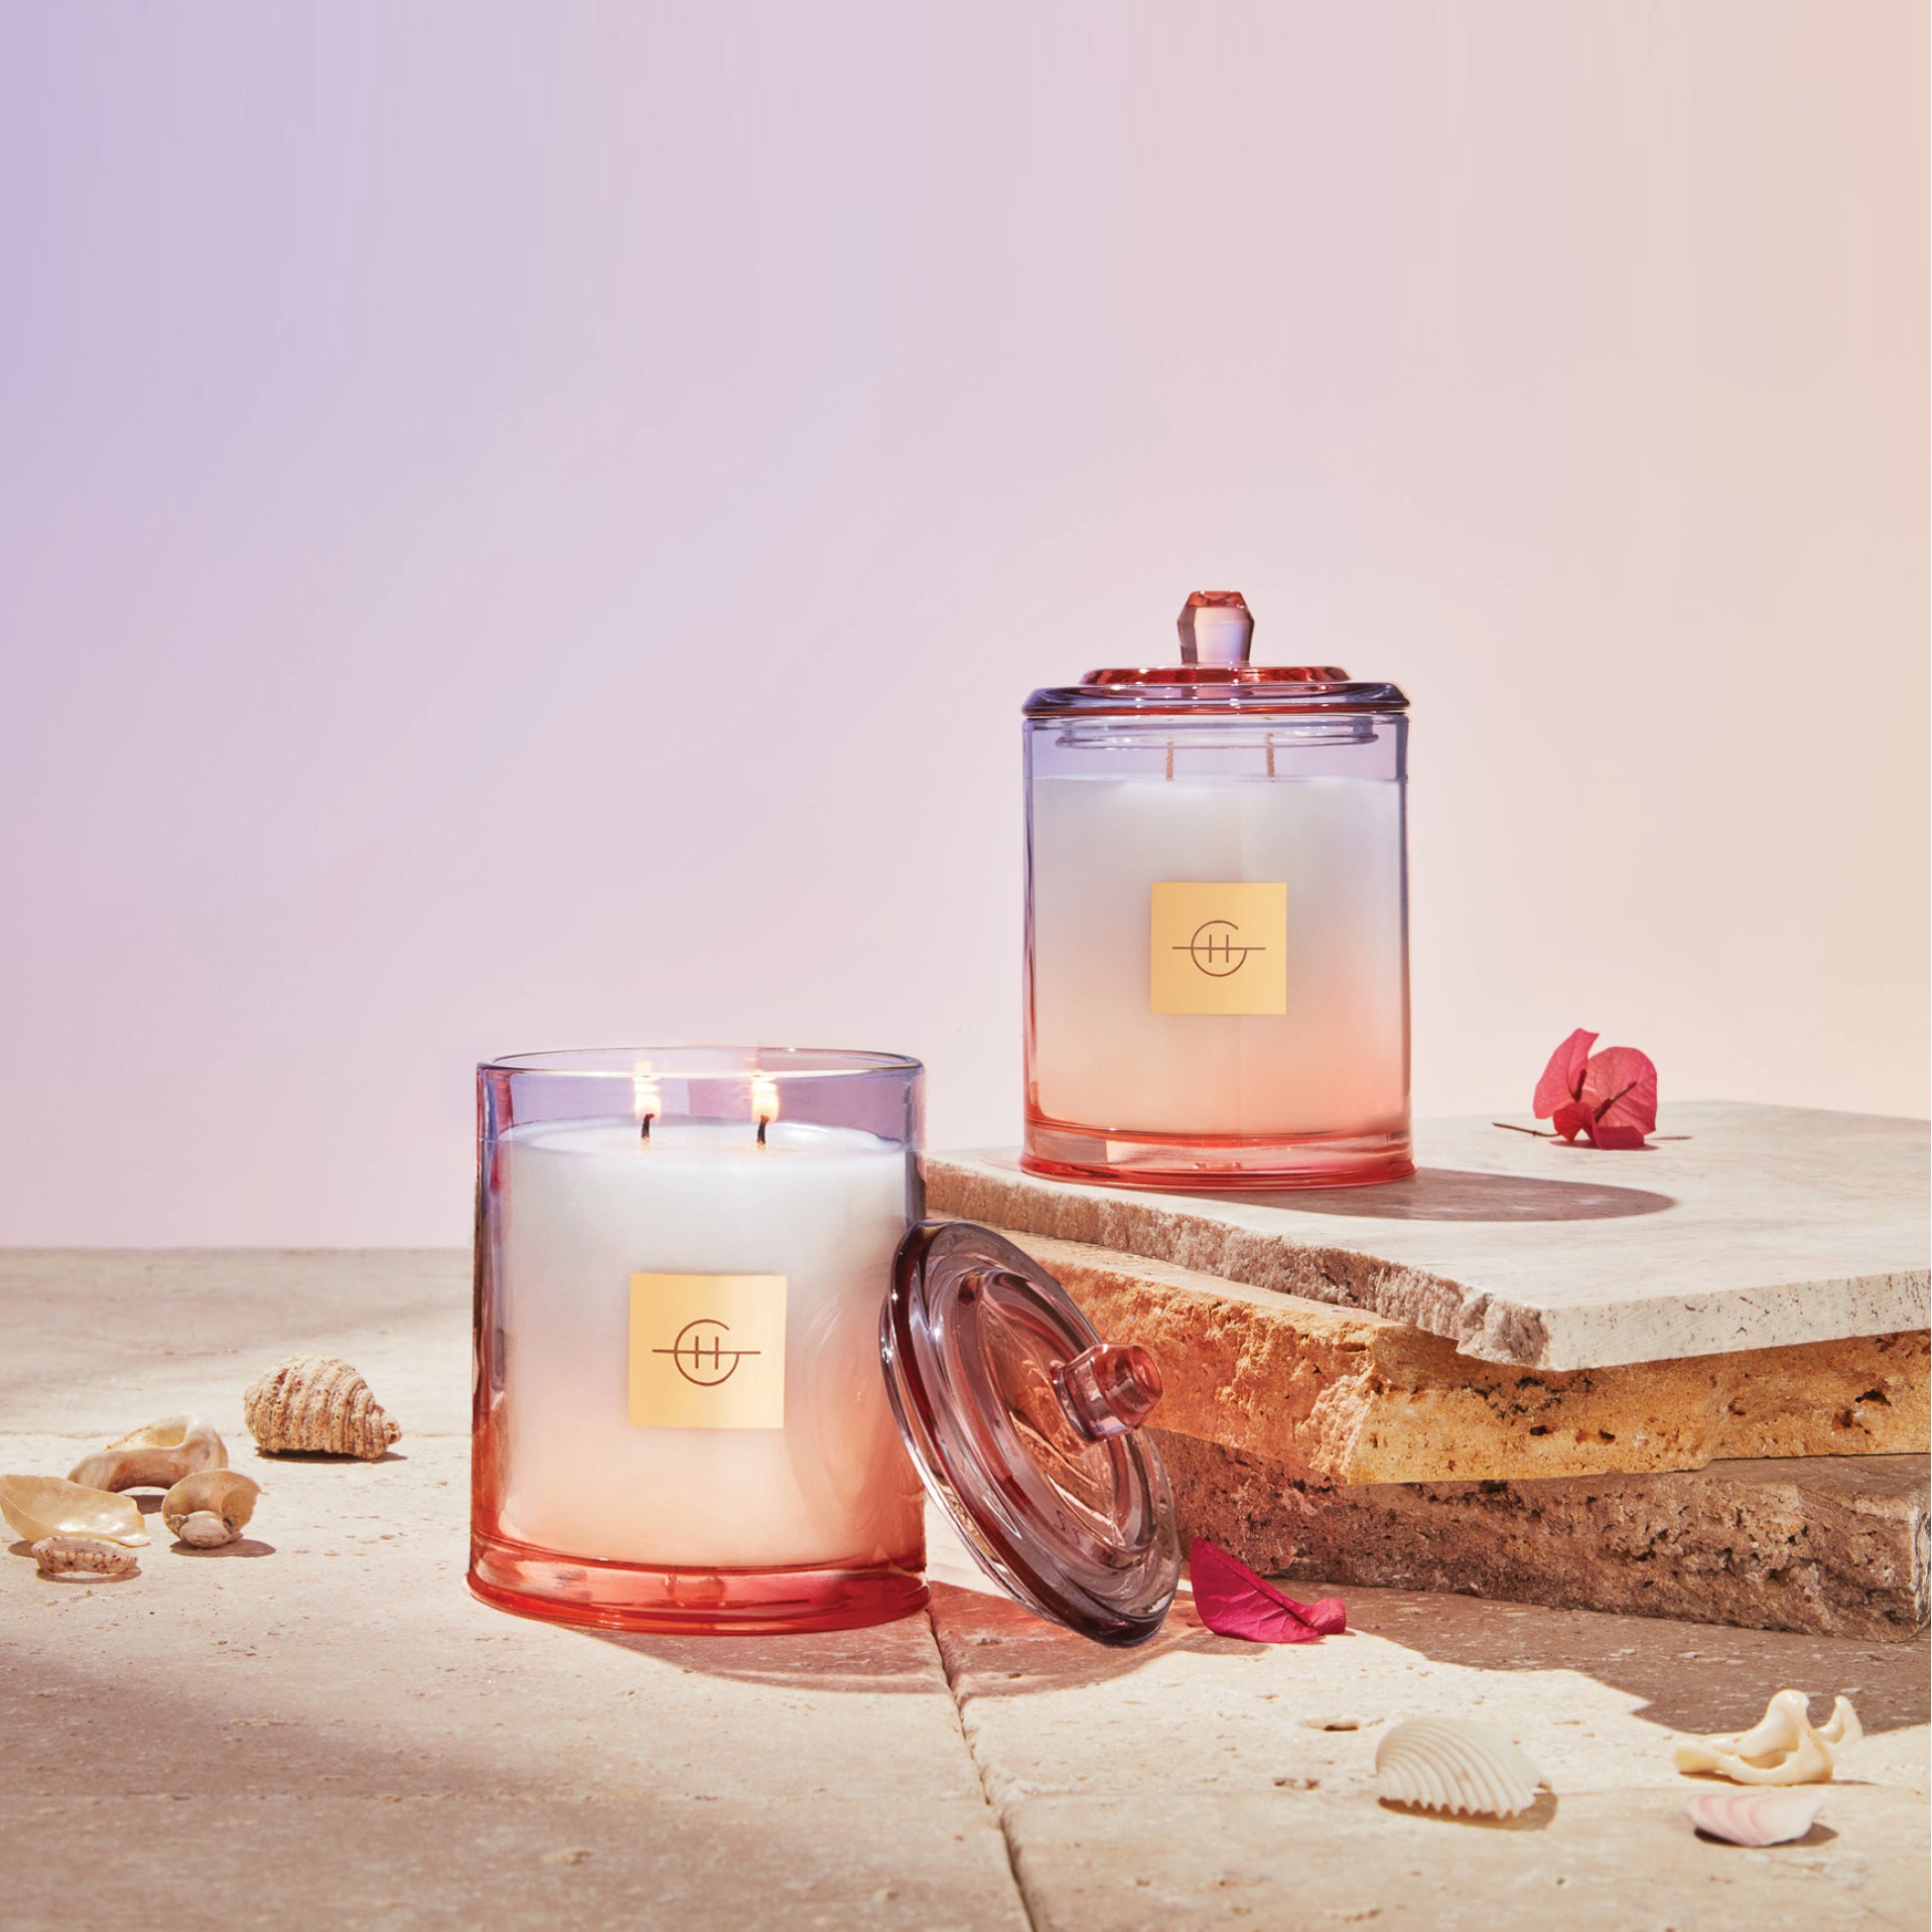 Glasshouse Fragrances Triple Scented Soy Candle Jar - 13.4 oz. - Sunsets in Capri (Limited Edition)